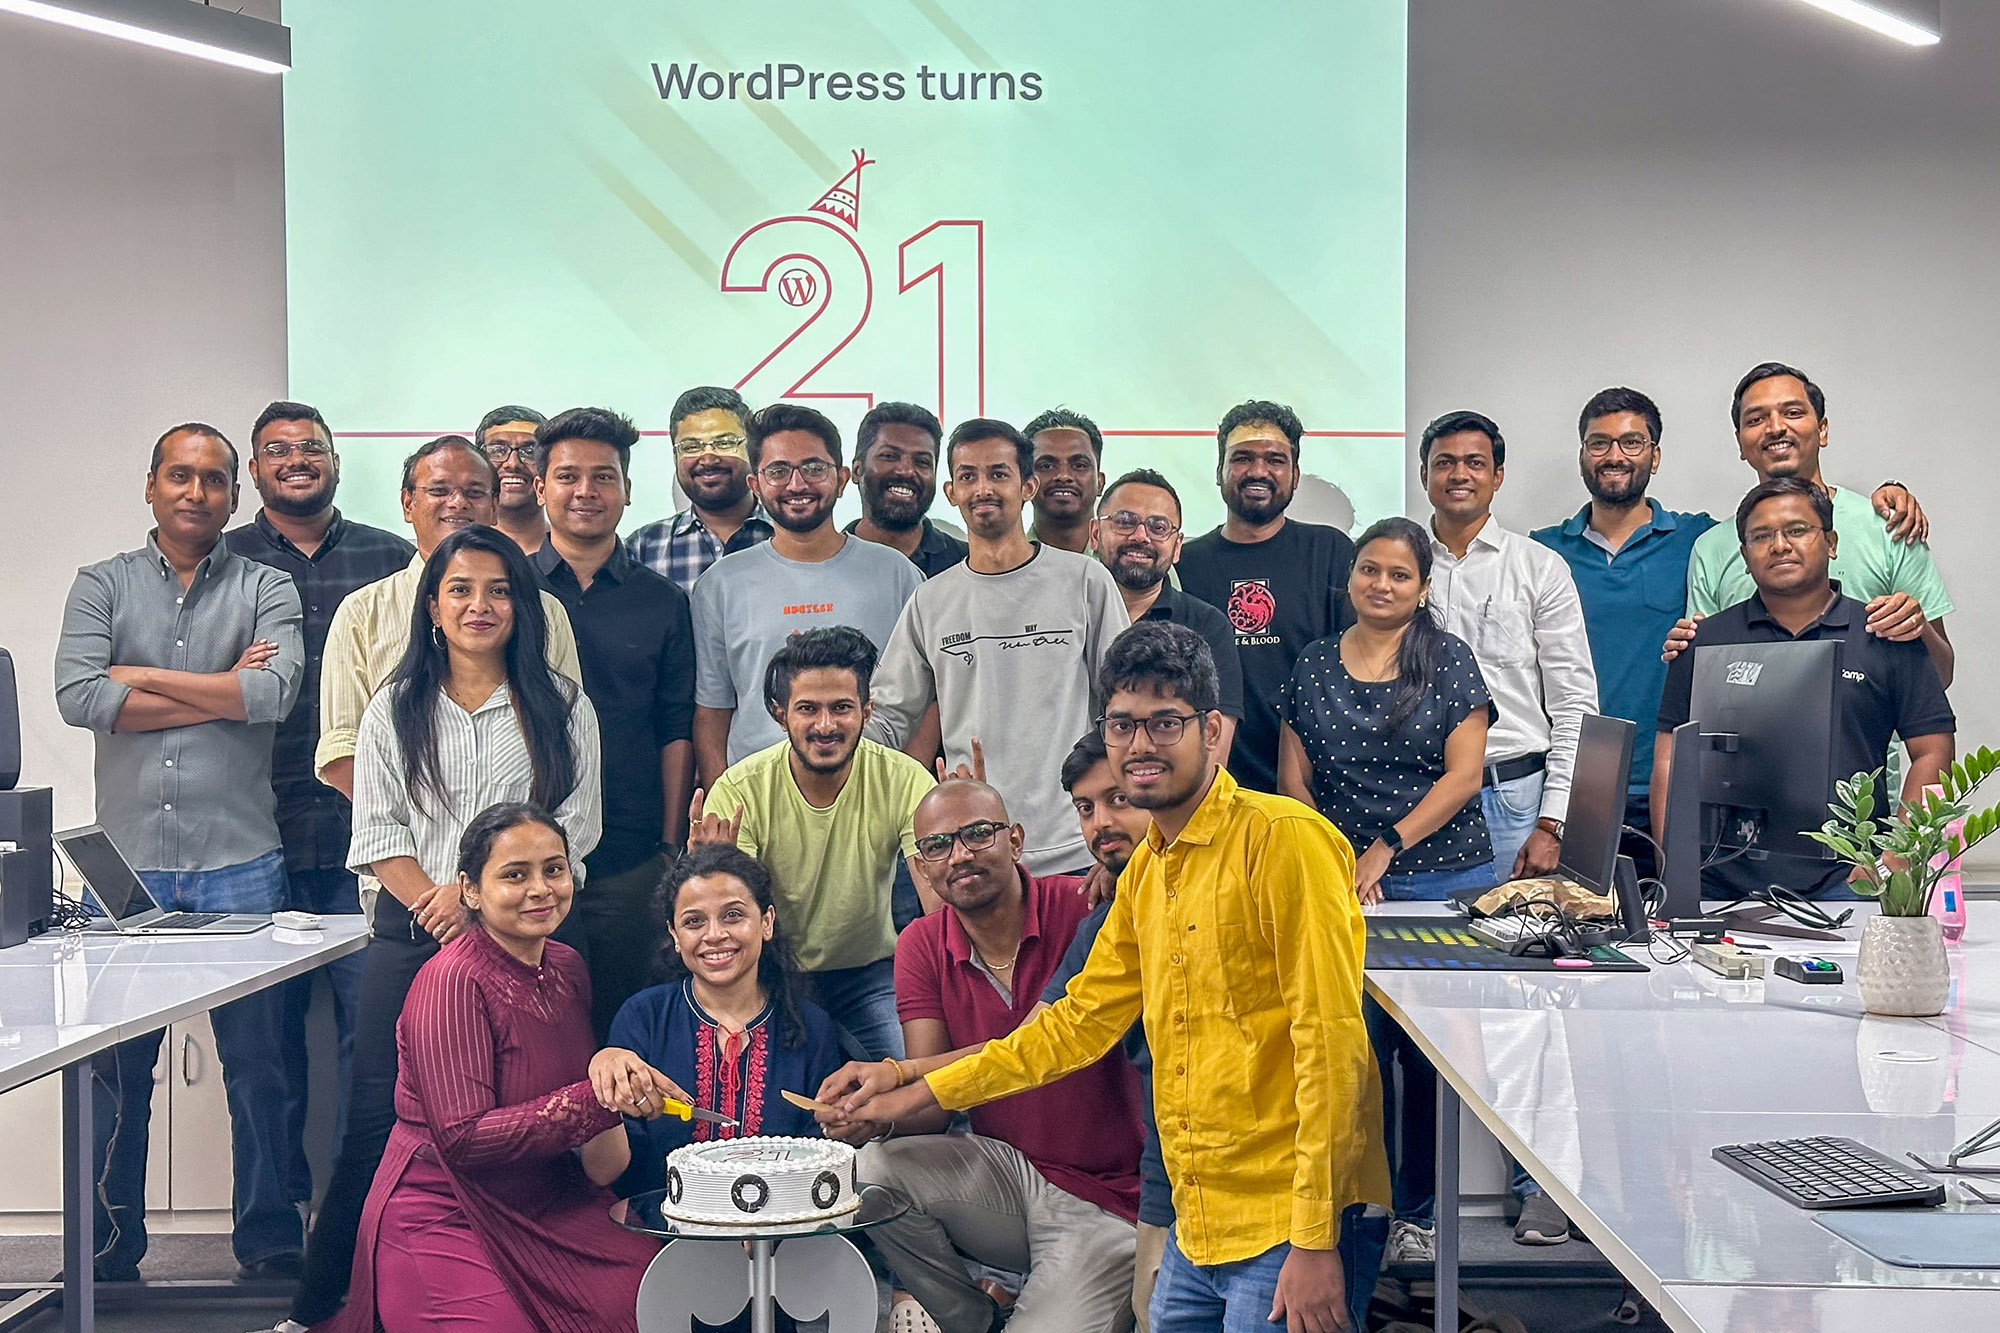 Cake cutting for WordPress 21st birthday, during the Contributors Week at rtCamp.